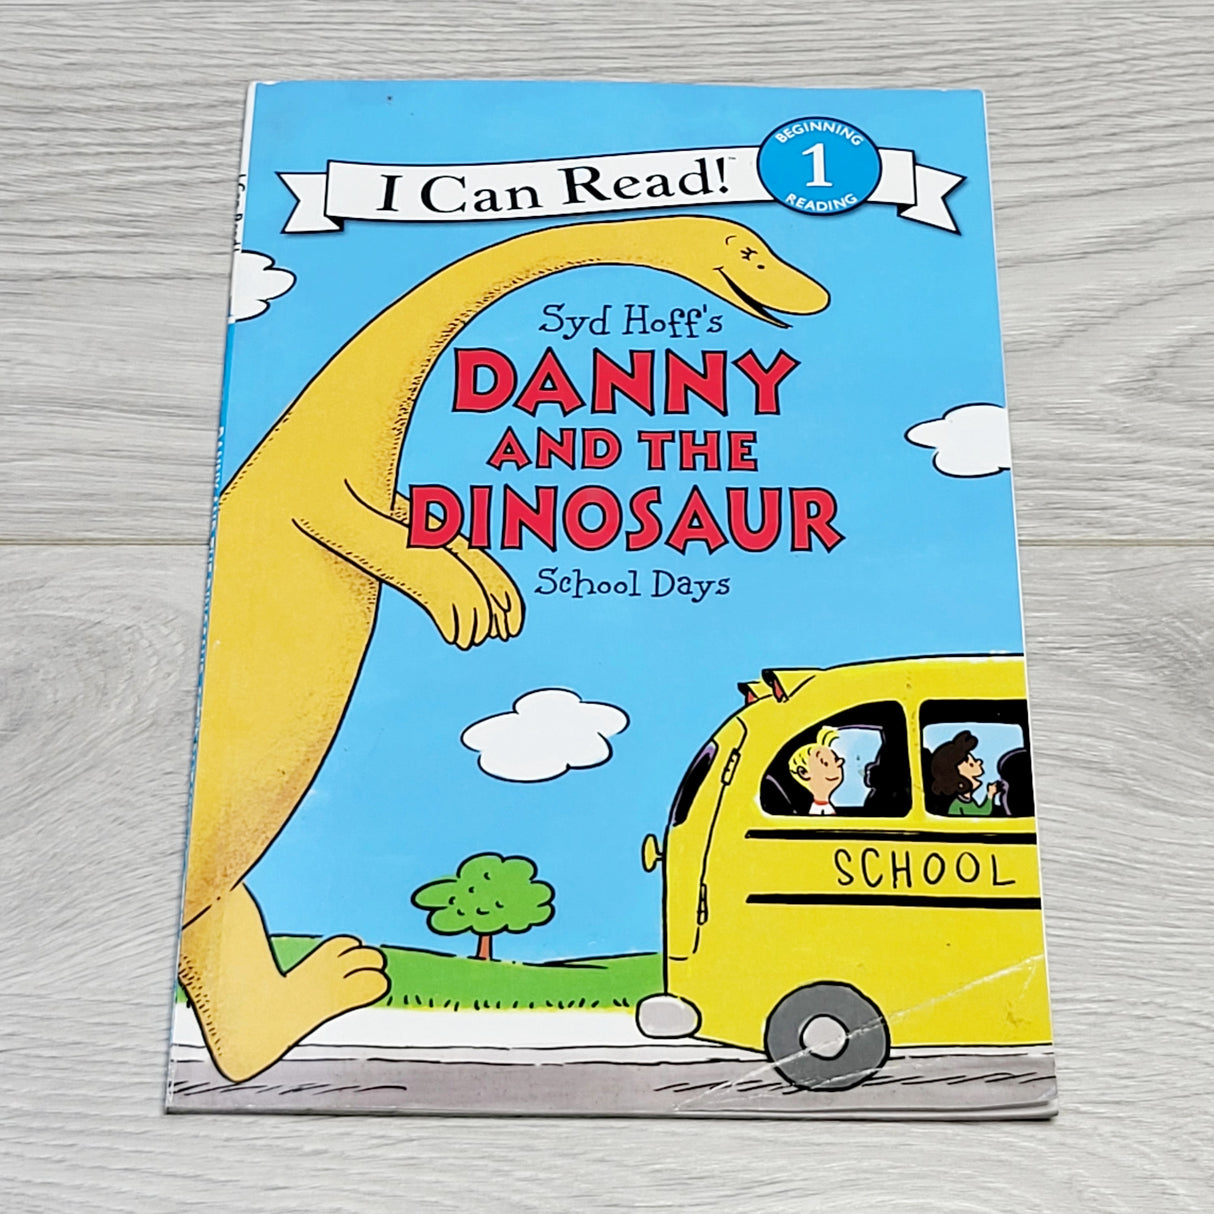 SPLT1 - Danny and the Dinosaur: School Days.  Soft cover early reader book